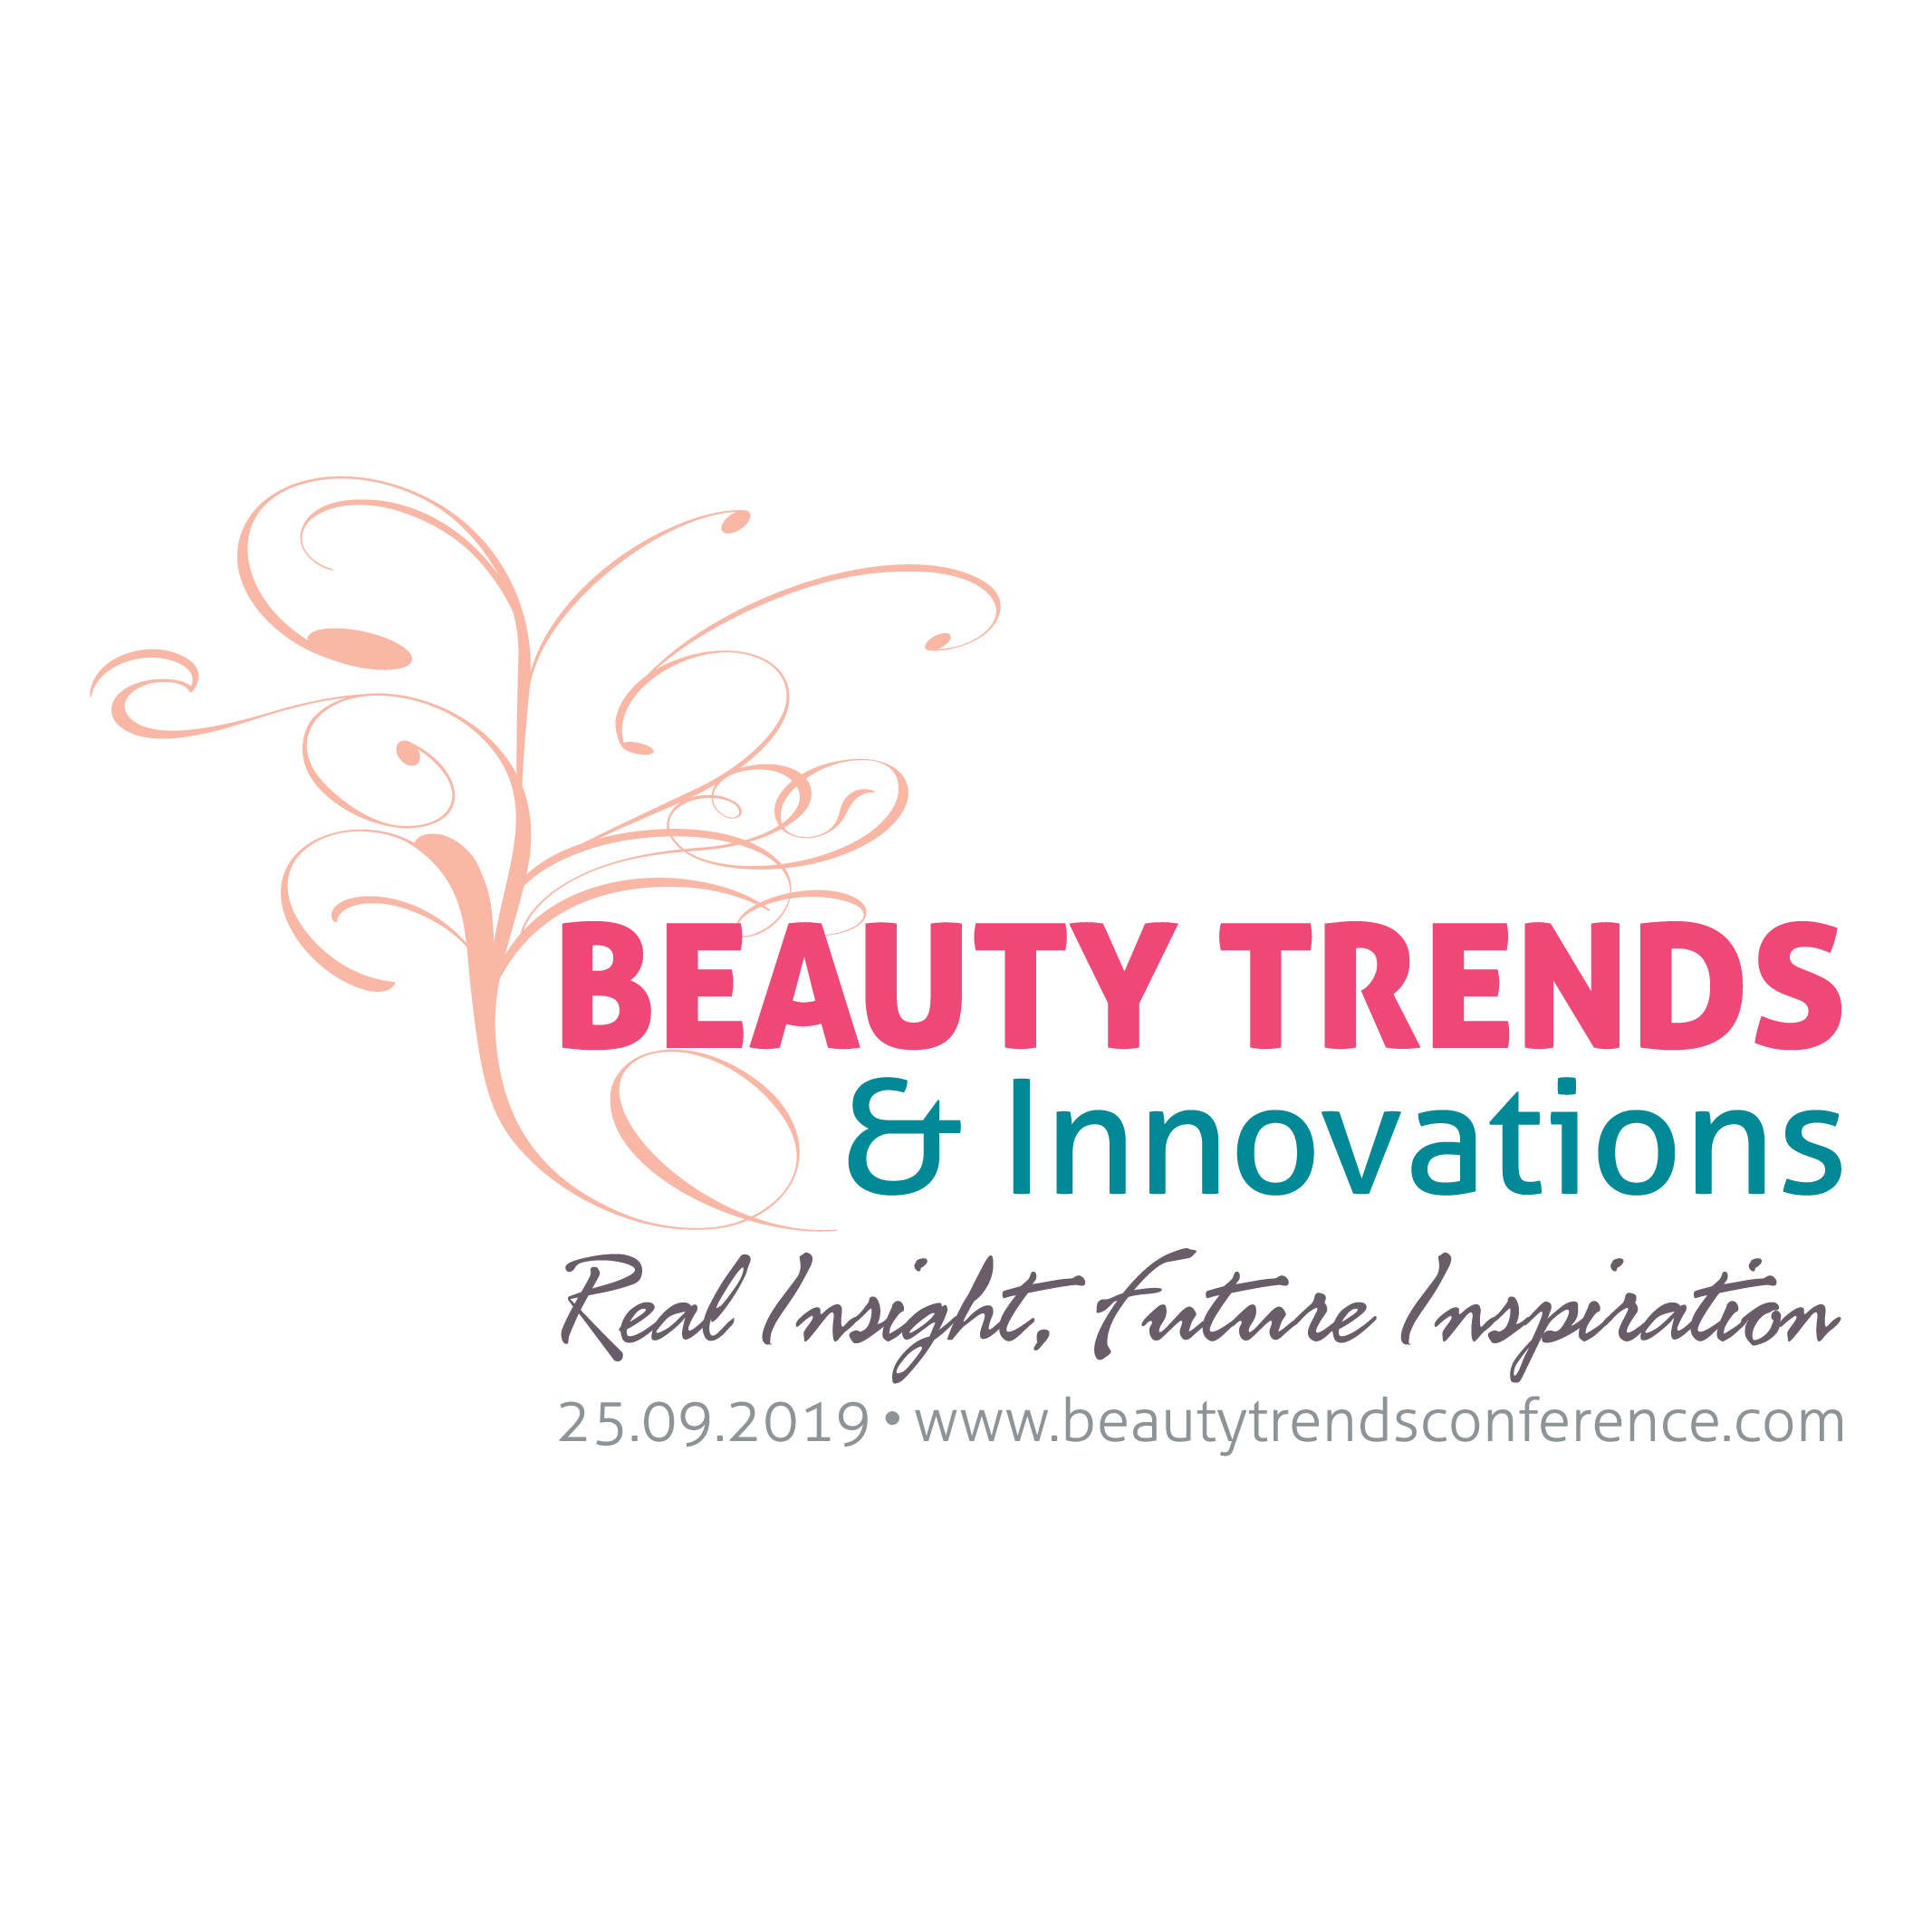 The Beauty Trends & Innovations Conference – Real Insight, Future Inspiration